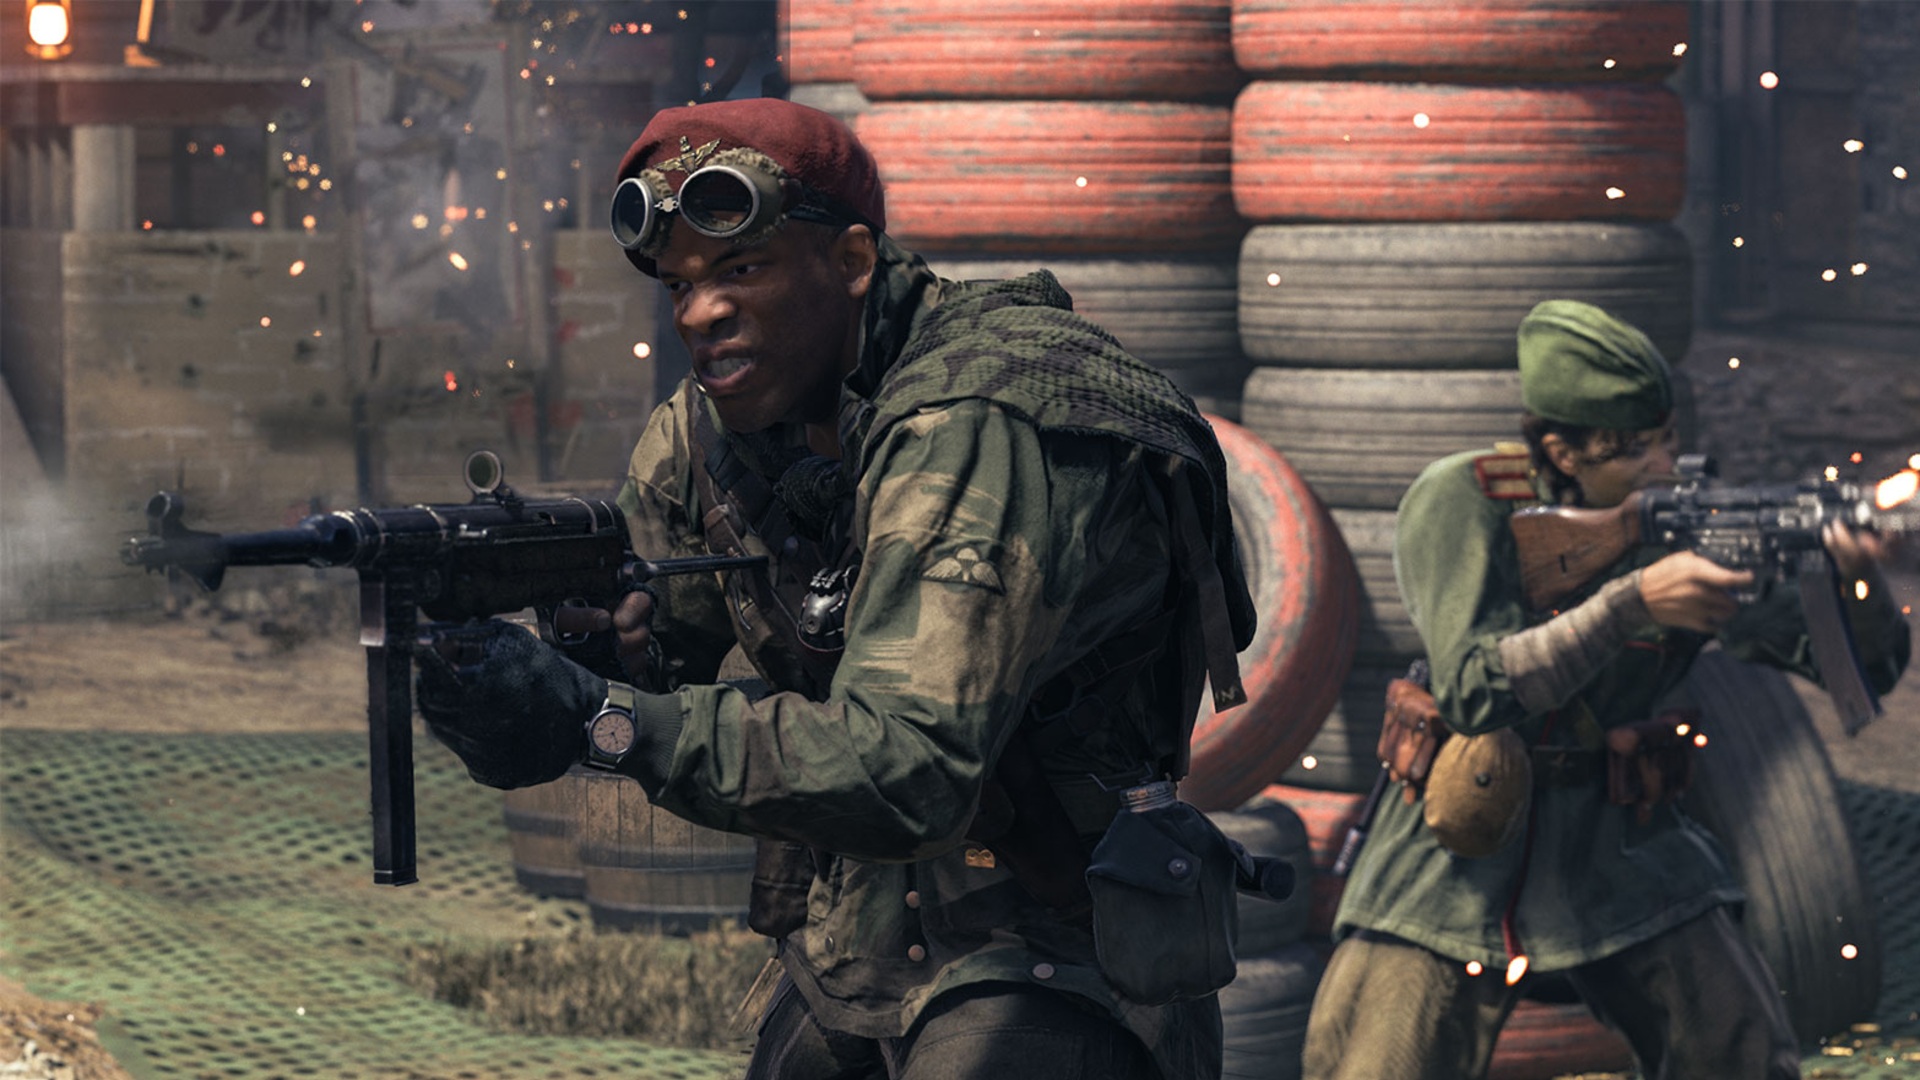 Vanguard preload time: A soldier yells as he fires his submachine gun, with another soldier covering him from behind